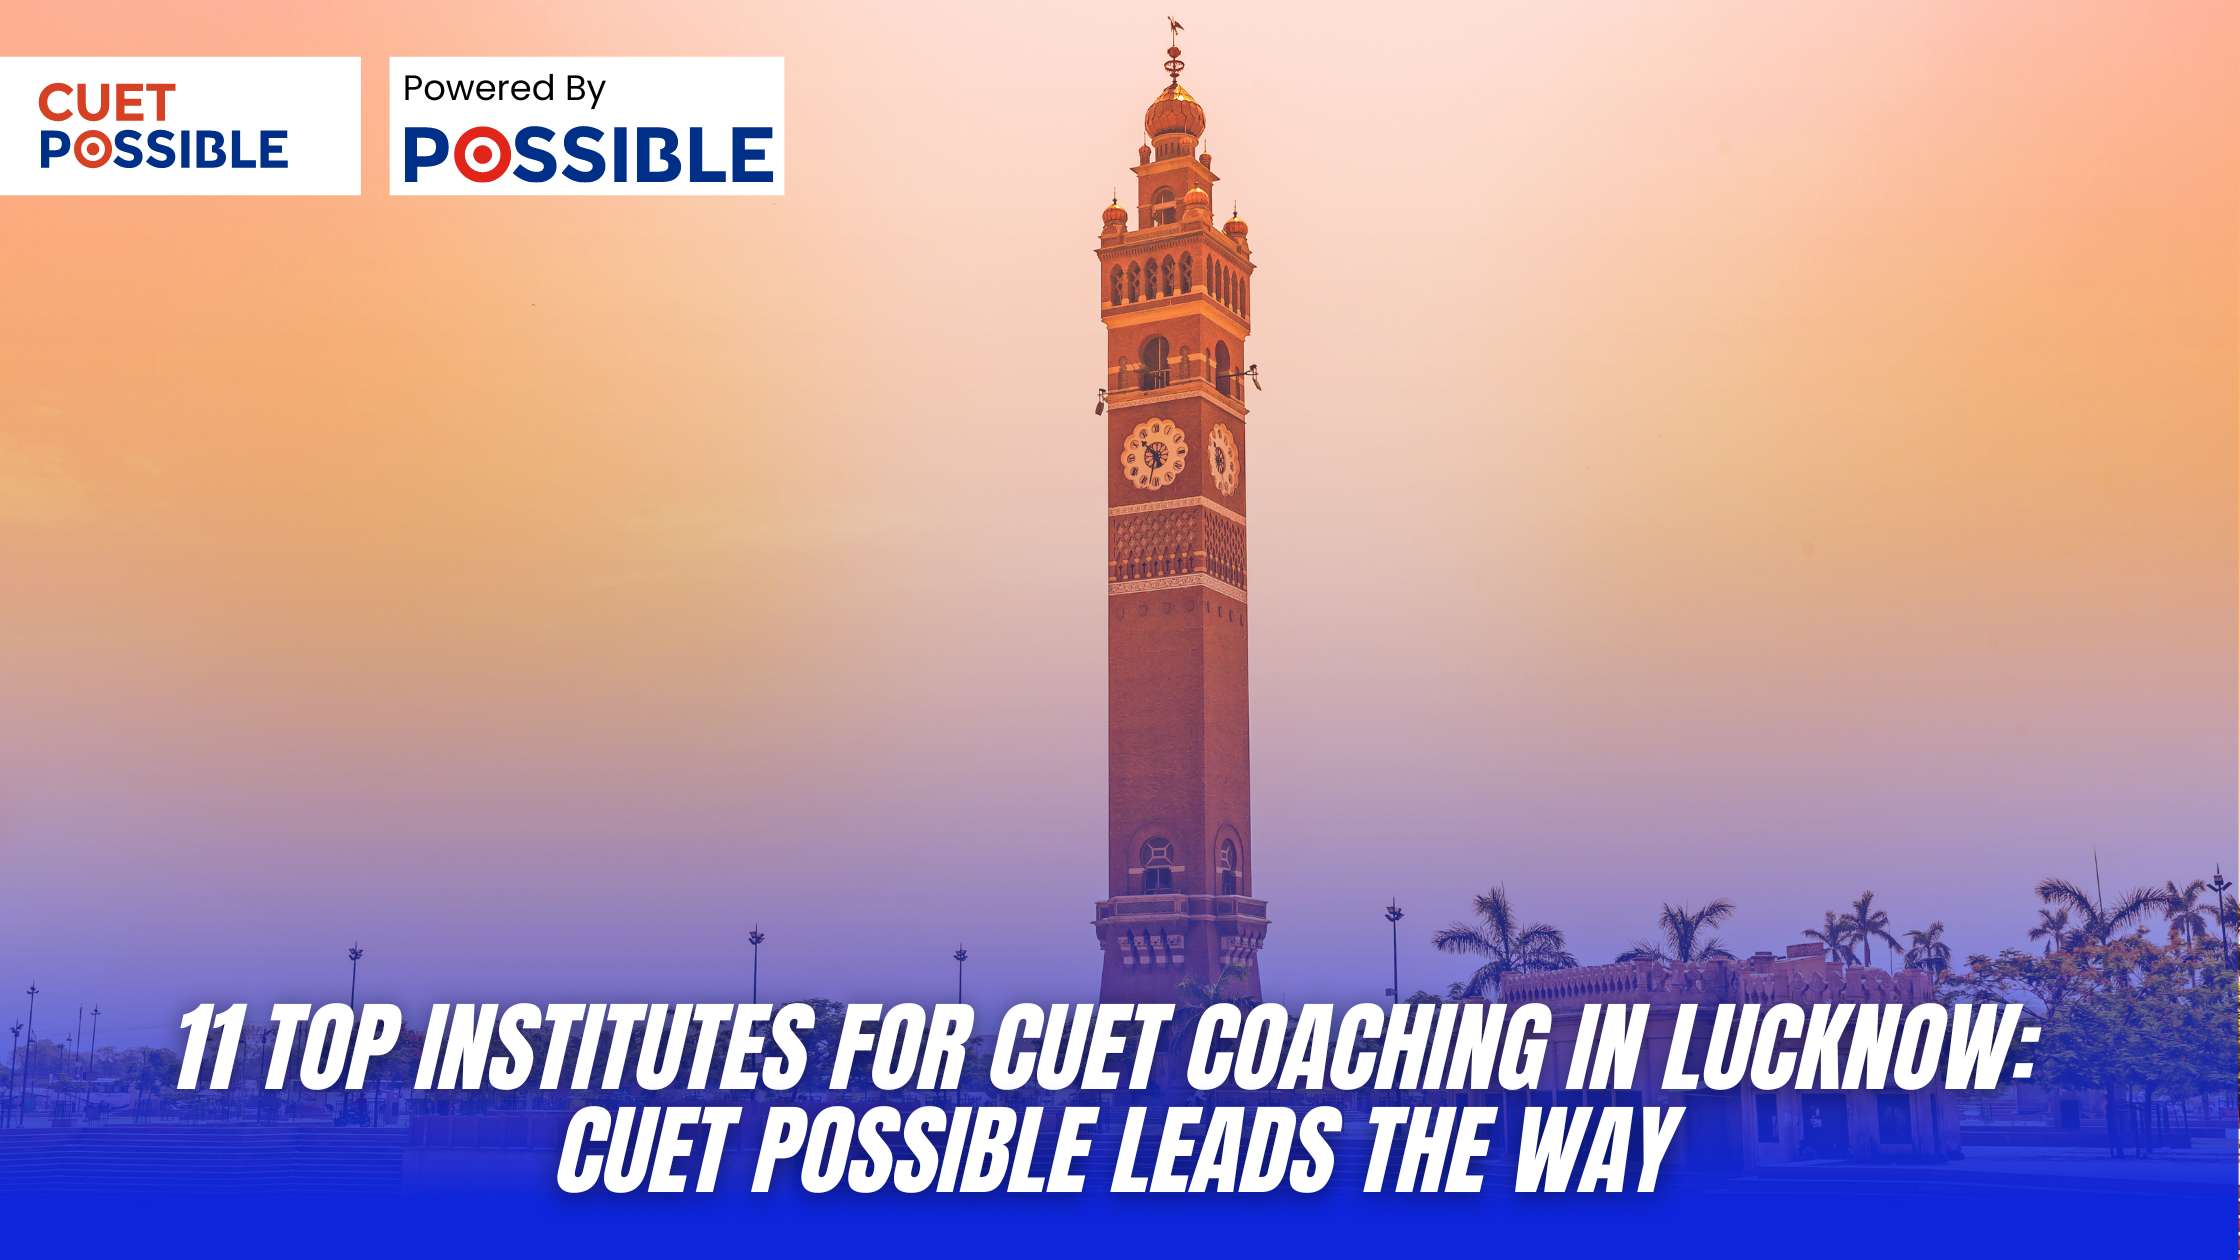 11 Top Institutes for CUET Coaching in Lucknow: CUET Possible Leads the Way